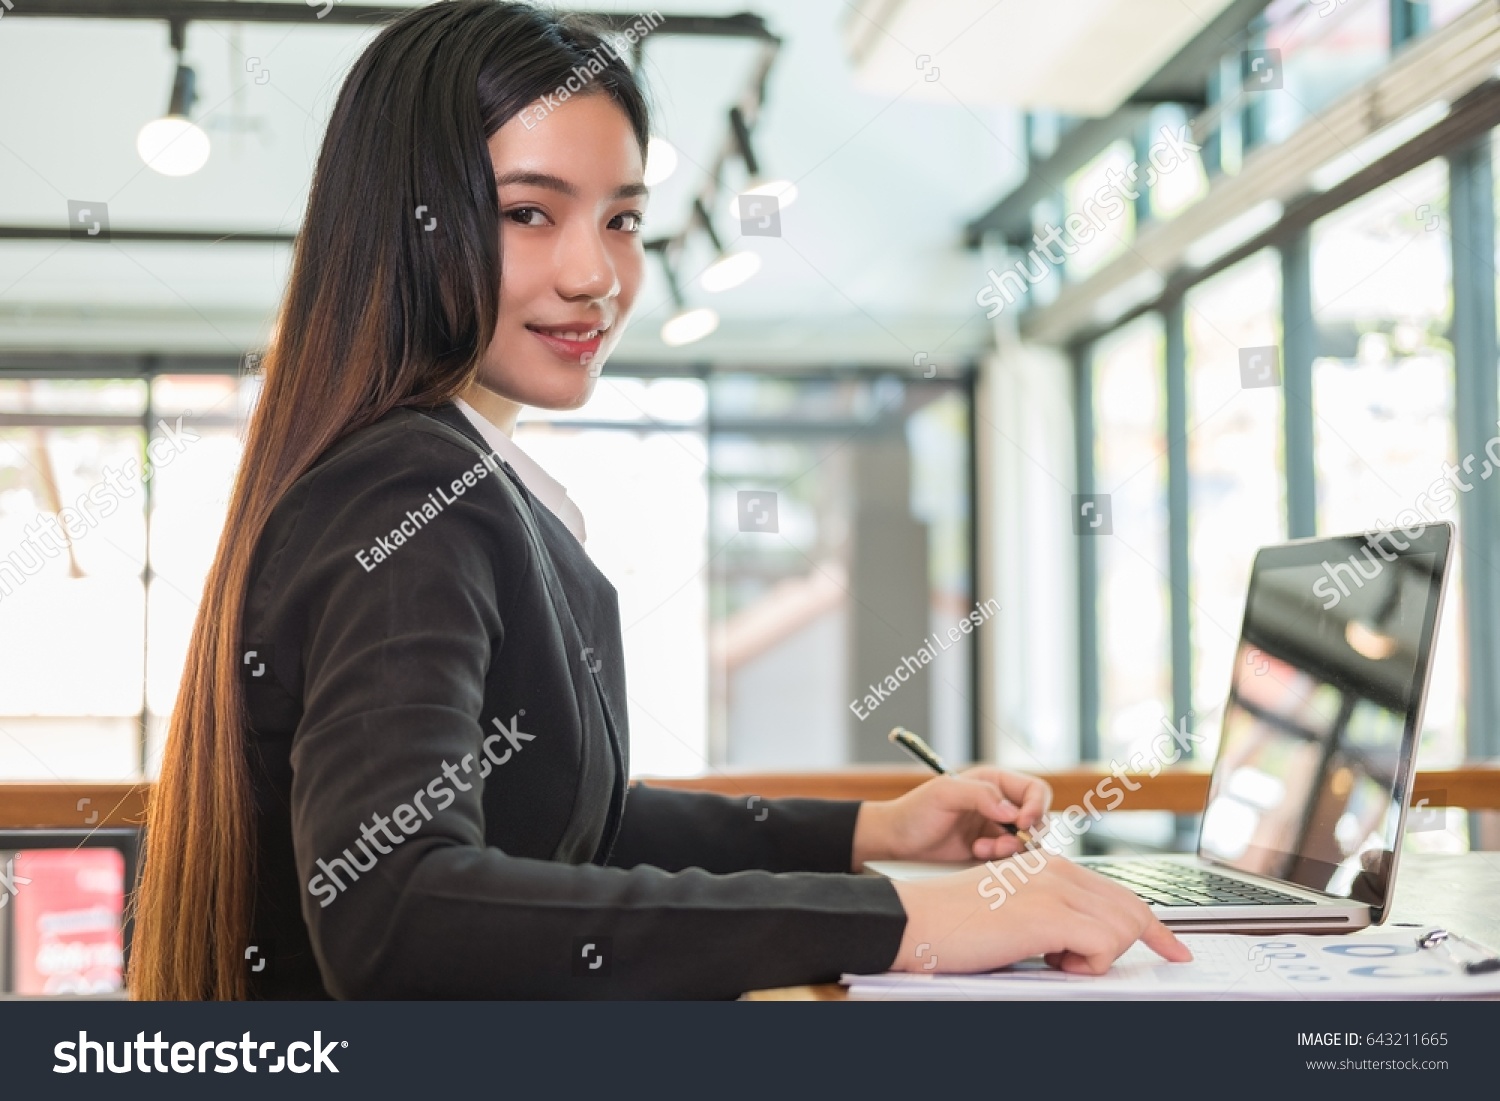 A business woman working on the laptop at the office #643211665